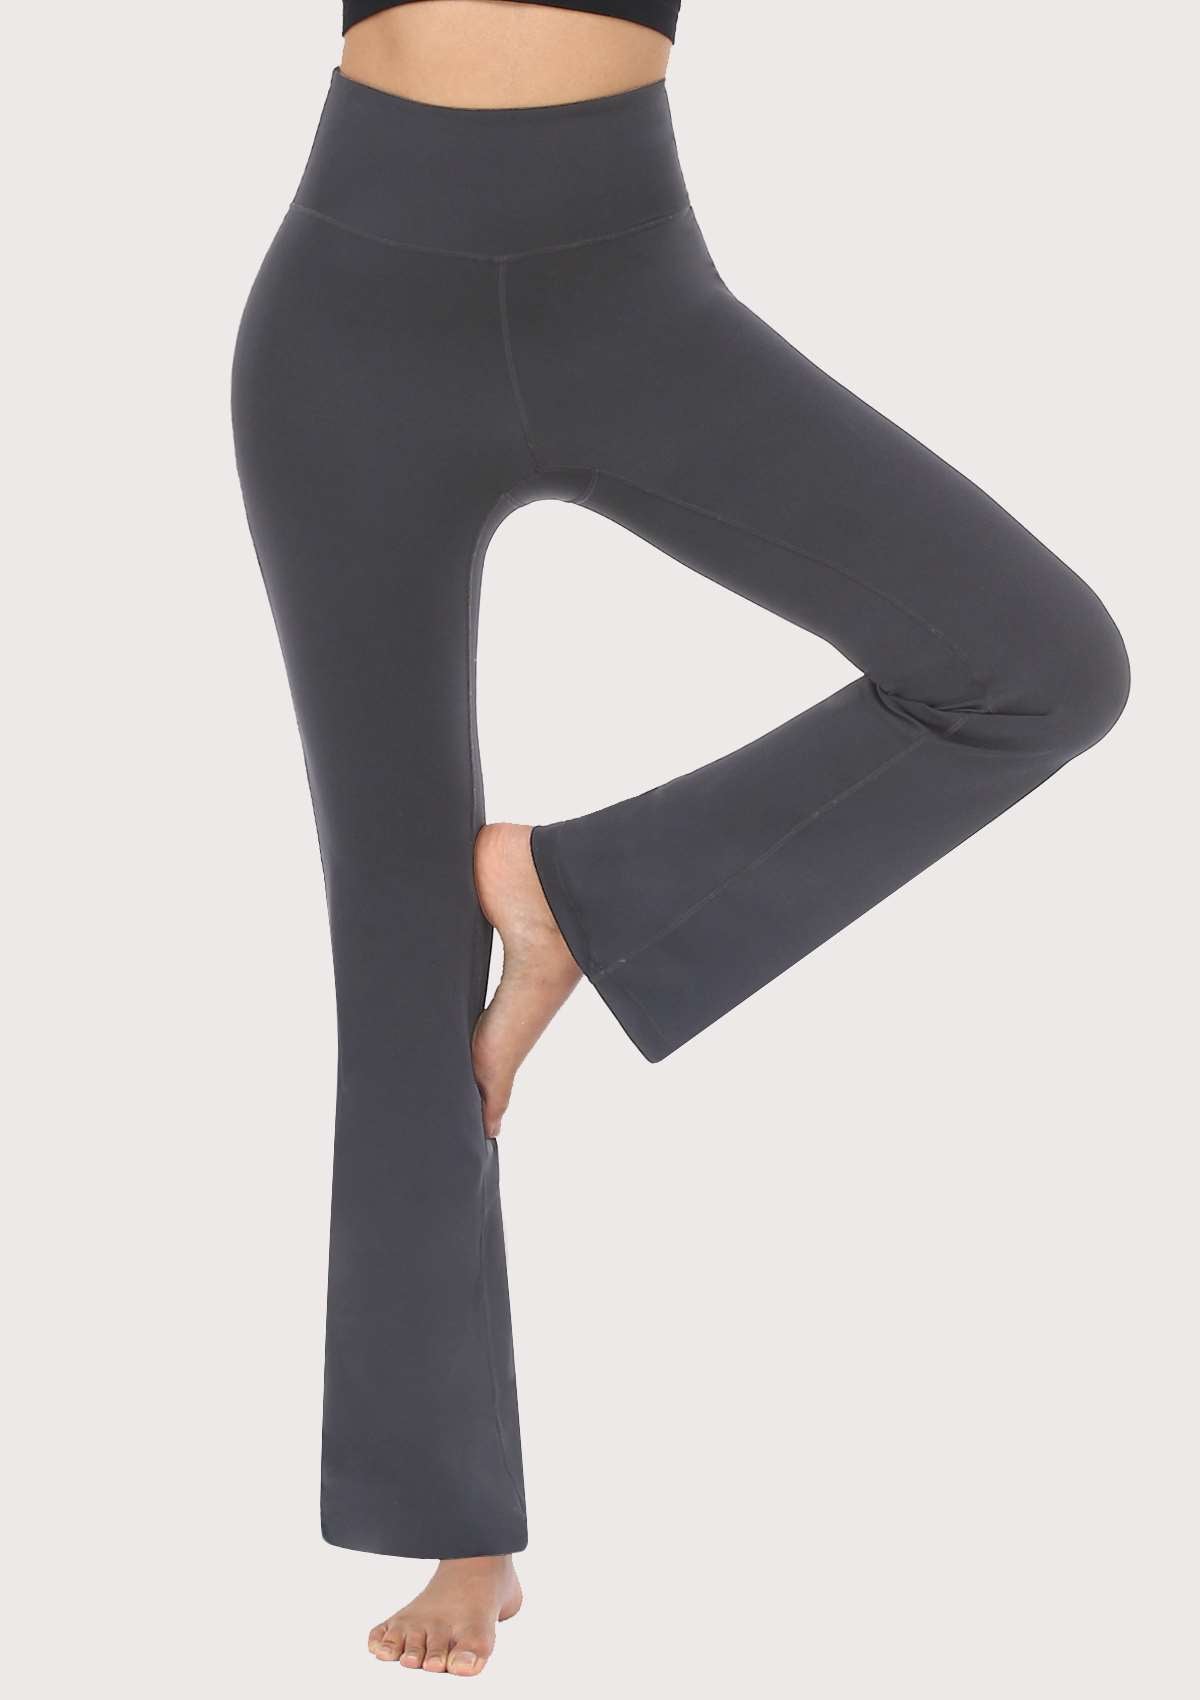 SONGFUL Smooth High Waisted Bootcut Yoga Sports Pants - XS / Black